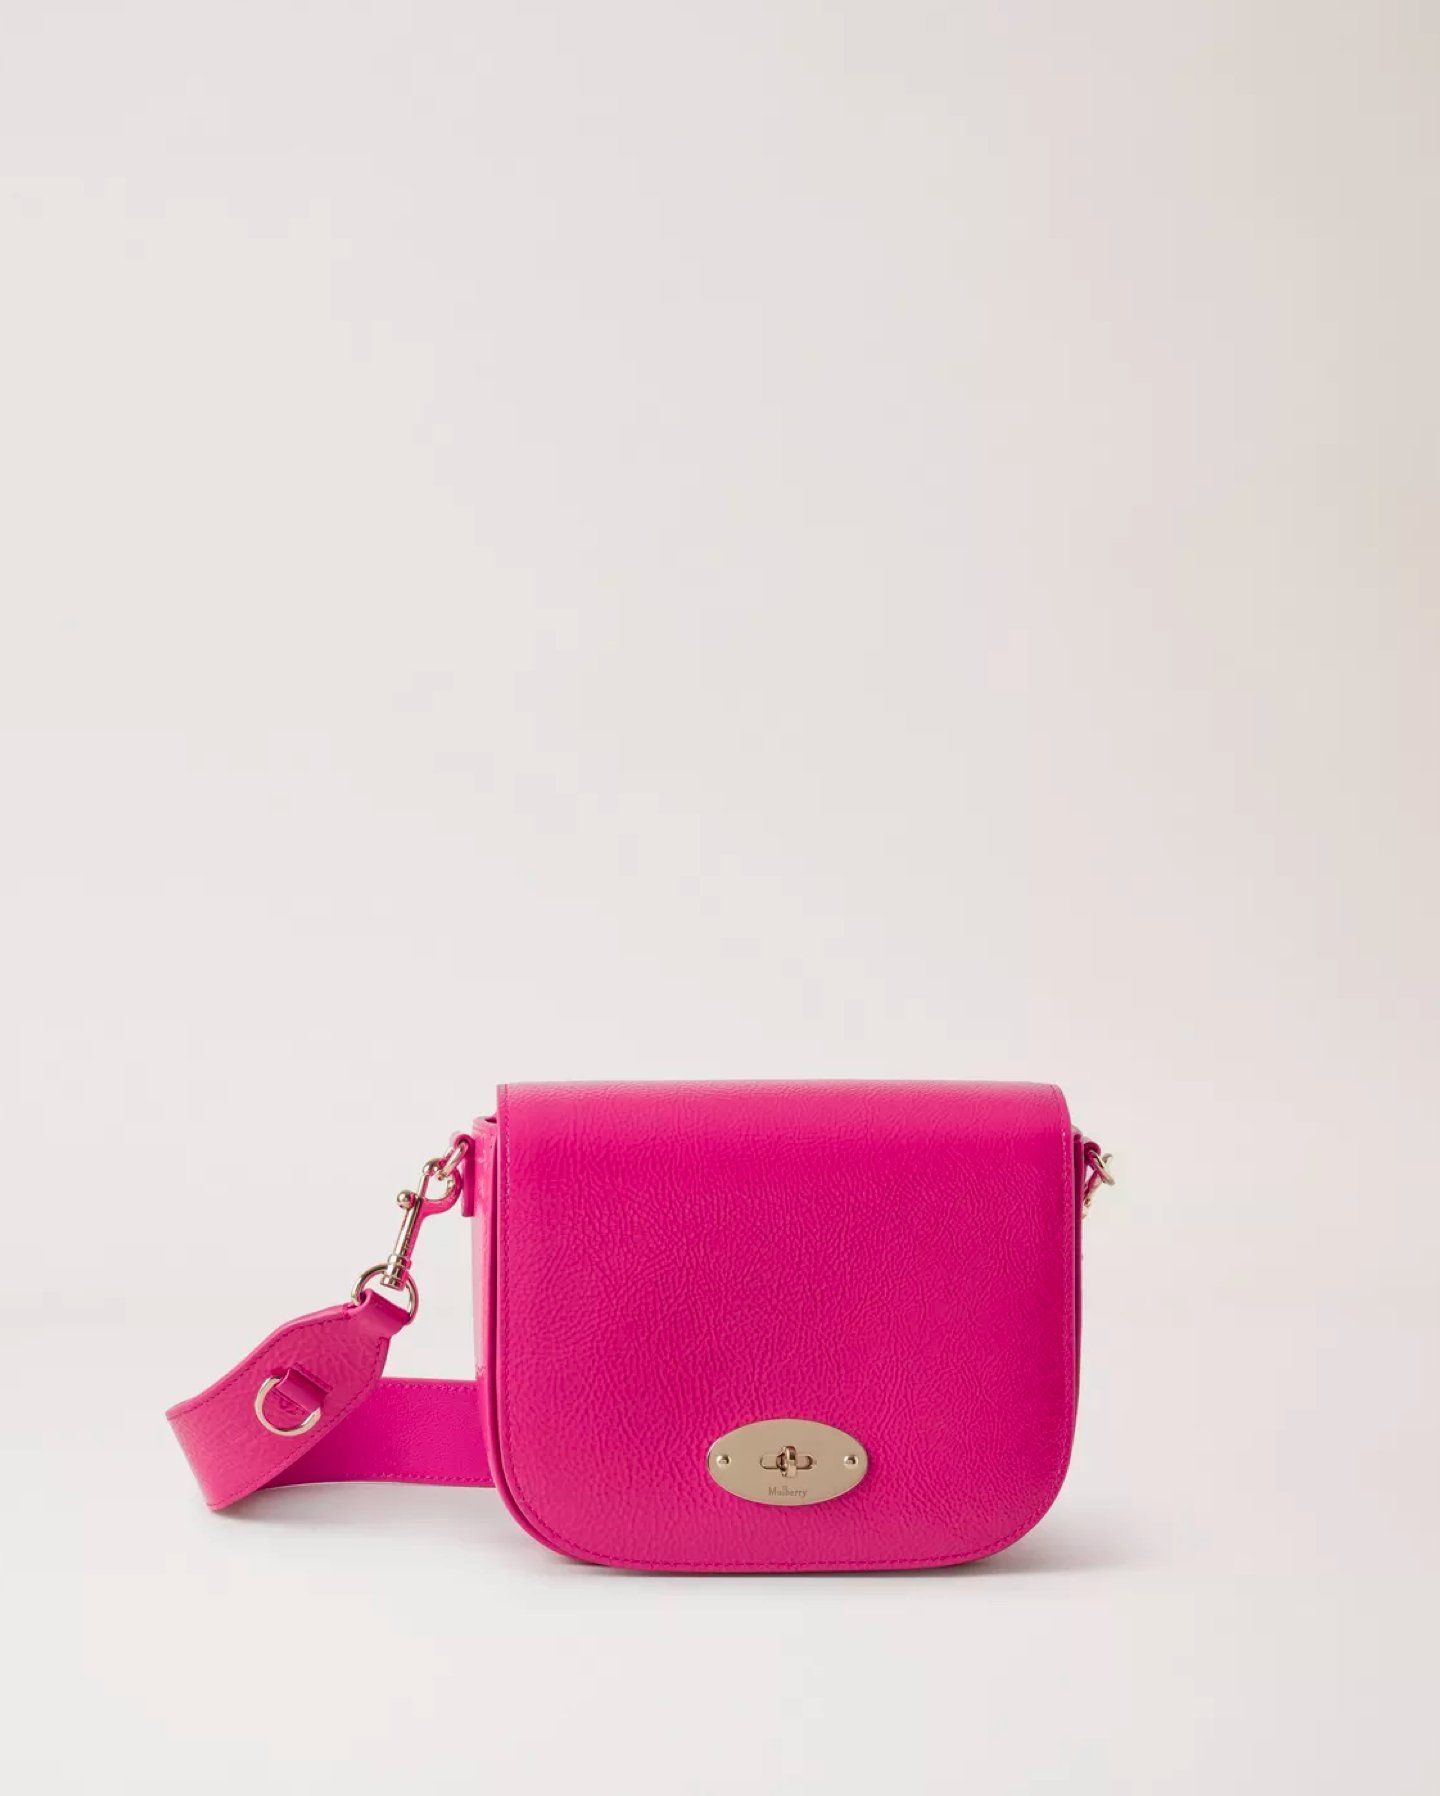 Small Darley Satchel in Mulberry Pink Spongy Patent